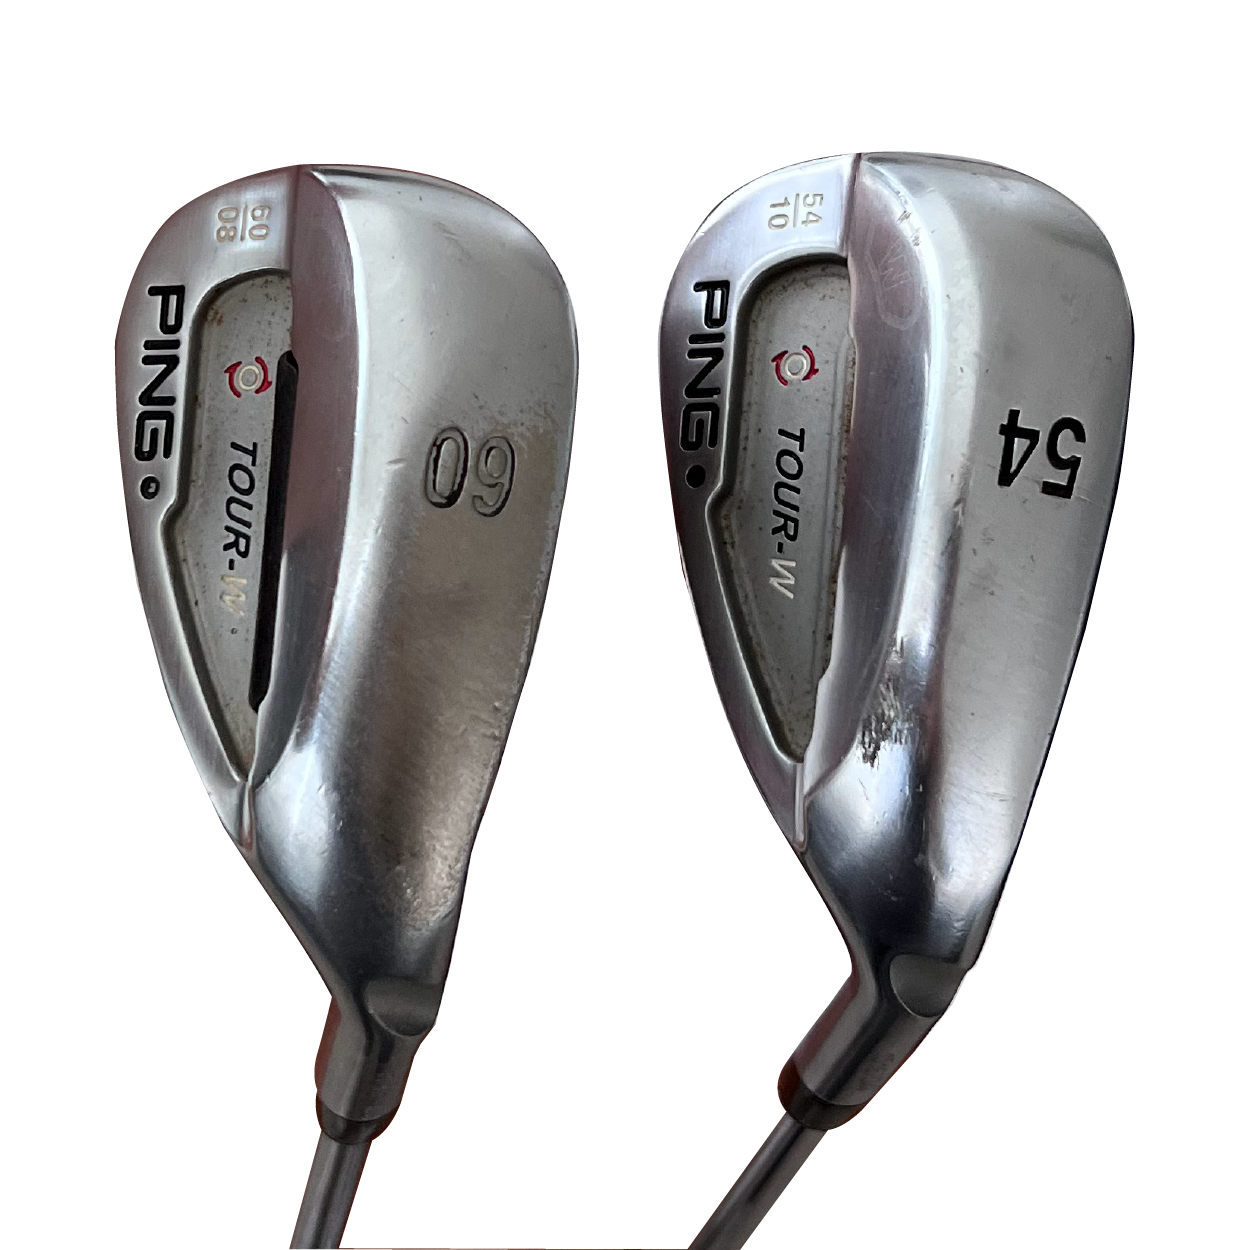 Ping - Tour W - Set of Wedges 54° & 60°